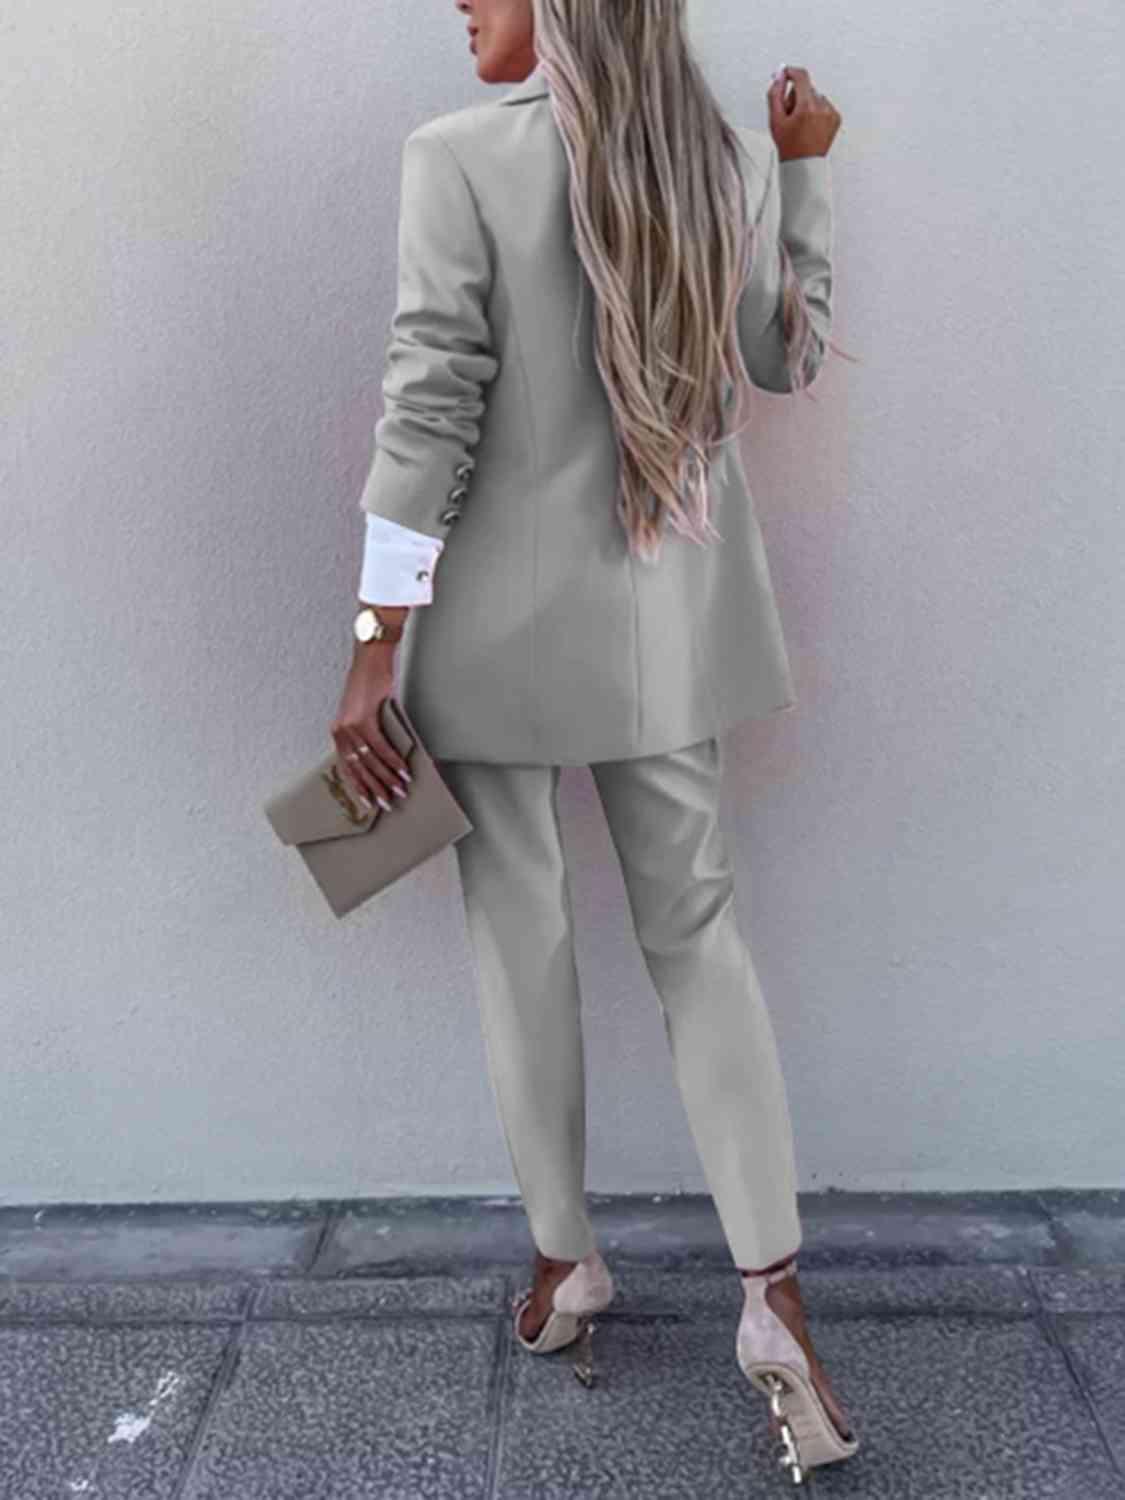 a woman in a suit and heels standing against a wall